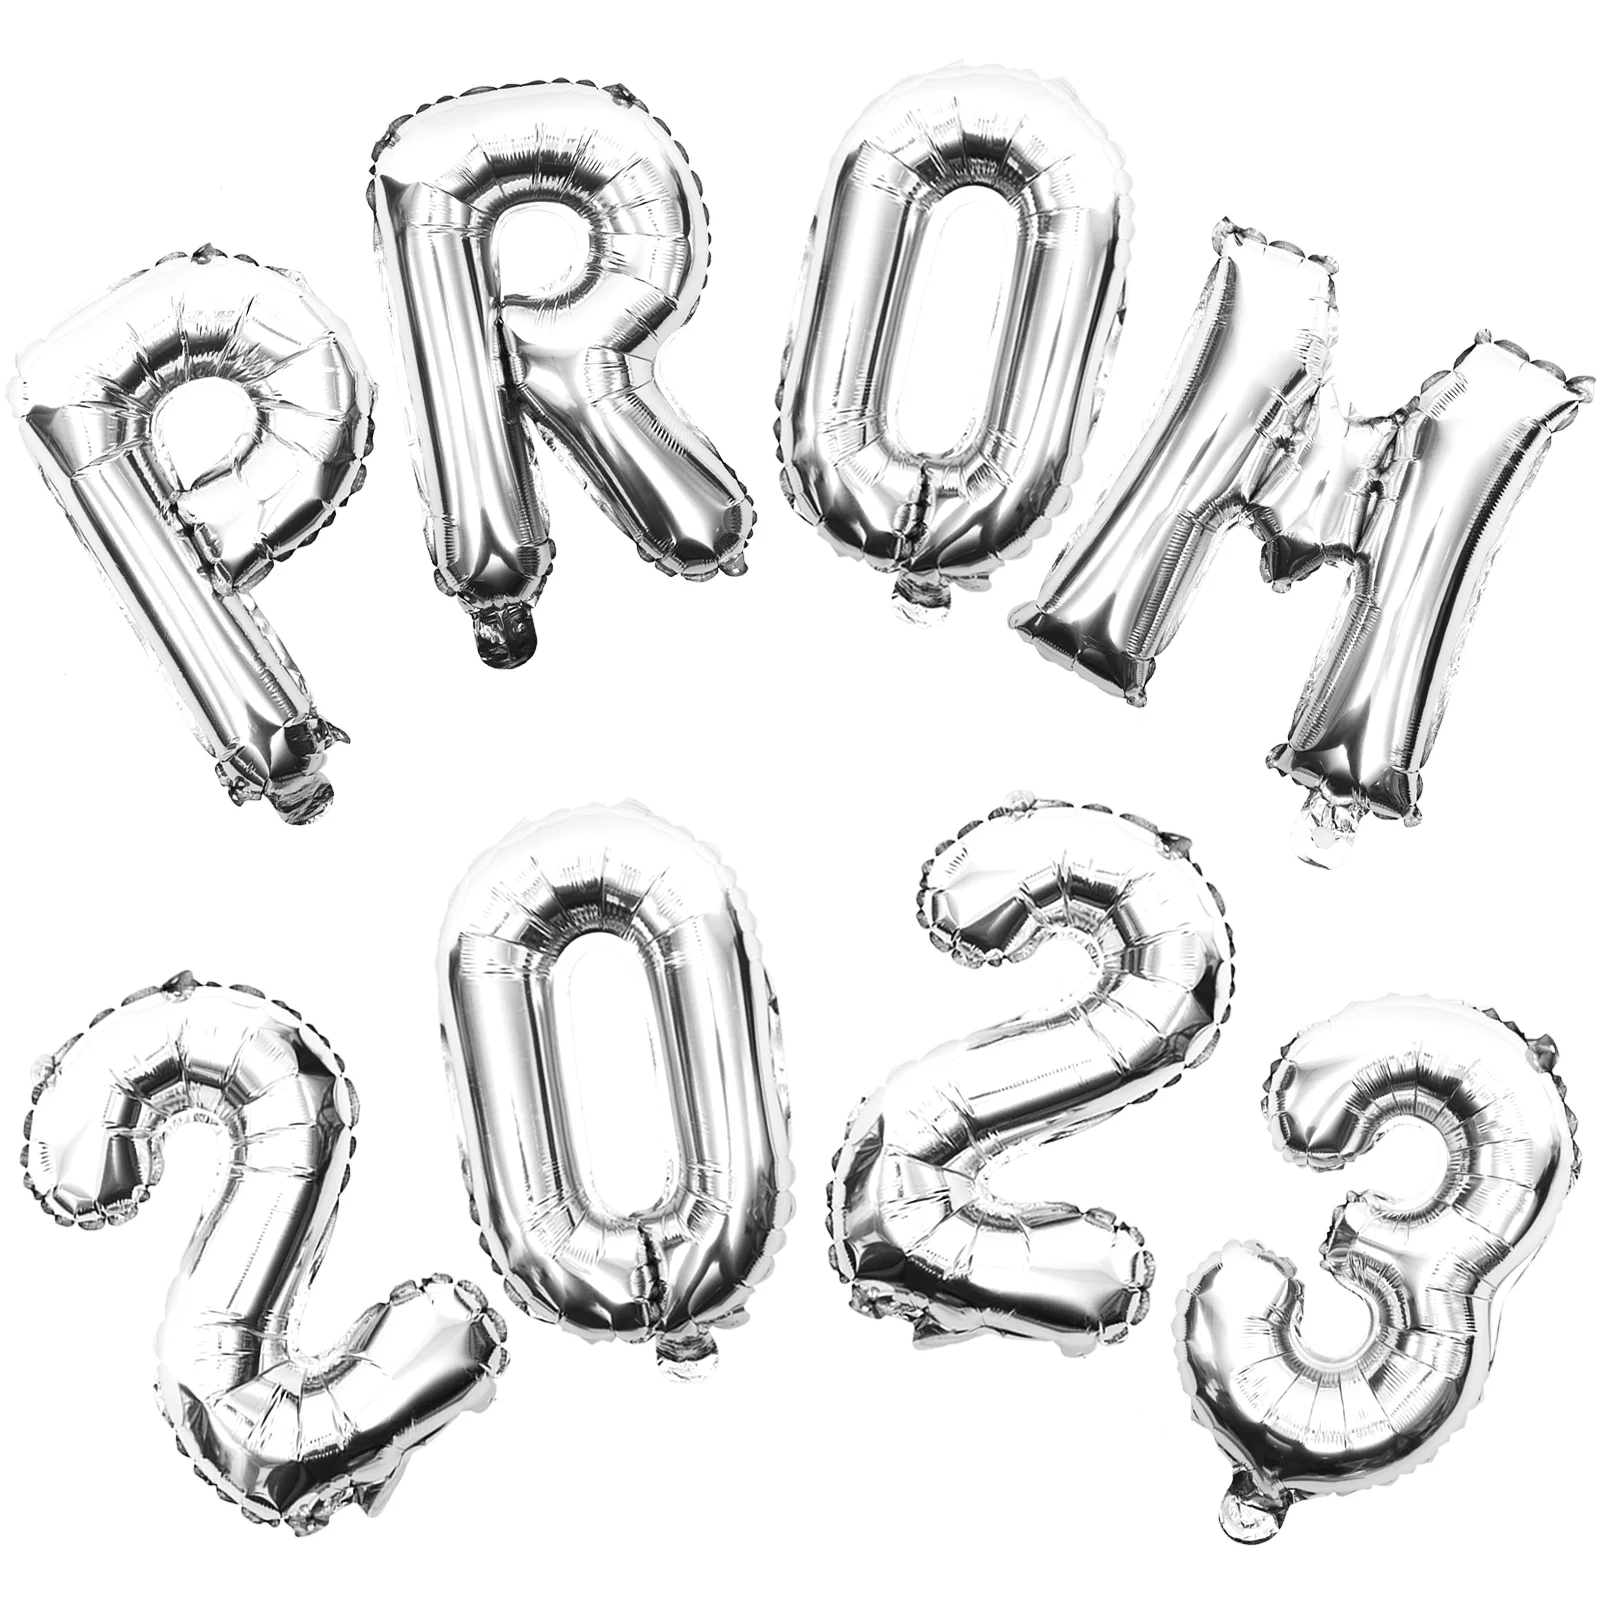 

Balloons Party Balloon Prom Graduation Grad Decorations New Aluminum Prop Festival Happy Decor Yearyears Eve Supplies Adornment